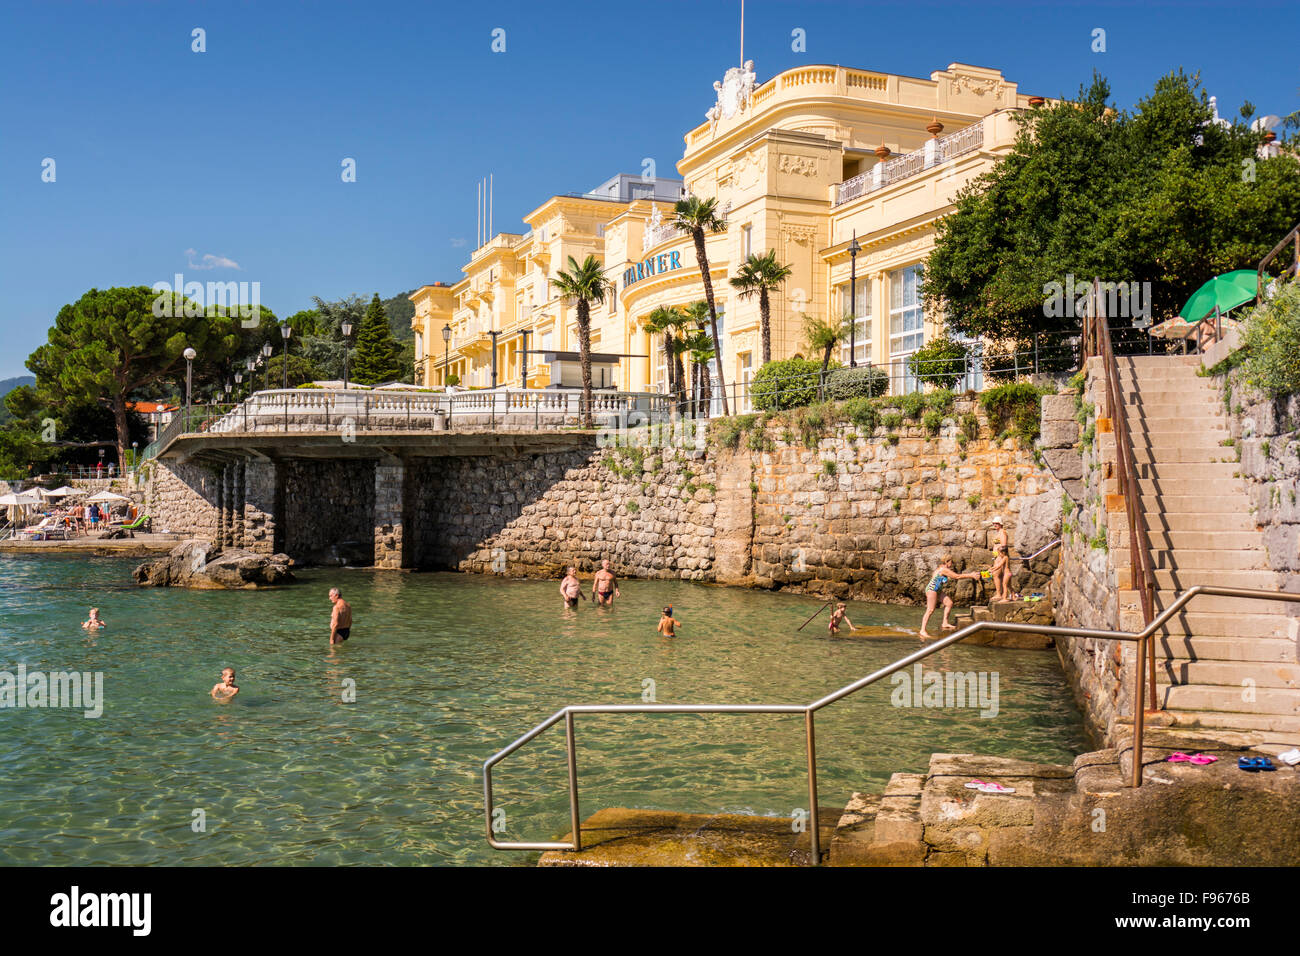 Hotel Kvarner. This was the first hotel in Opatija, and probably on the eastern coast of the Adriatic. It was built in 1884. Stock Photo